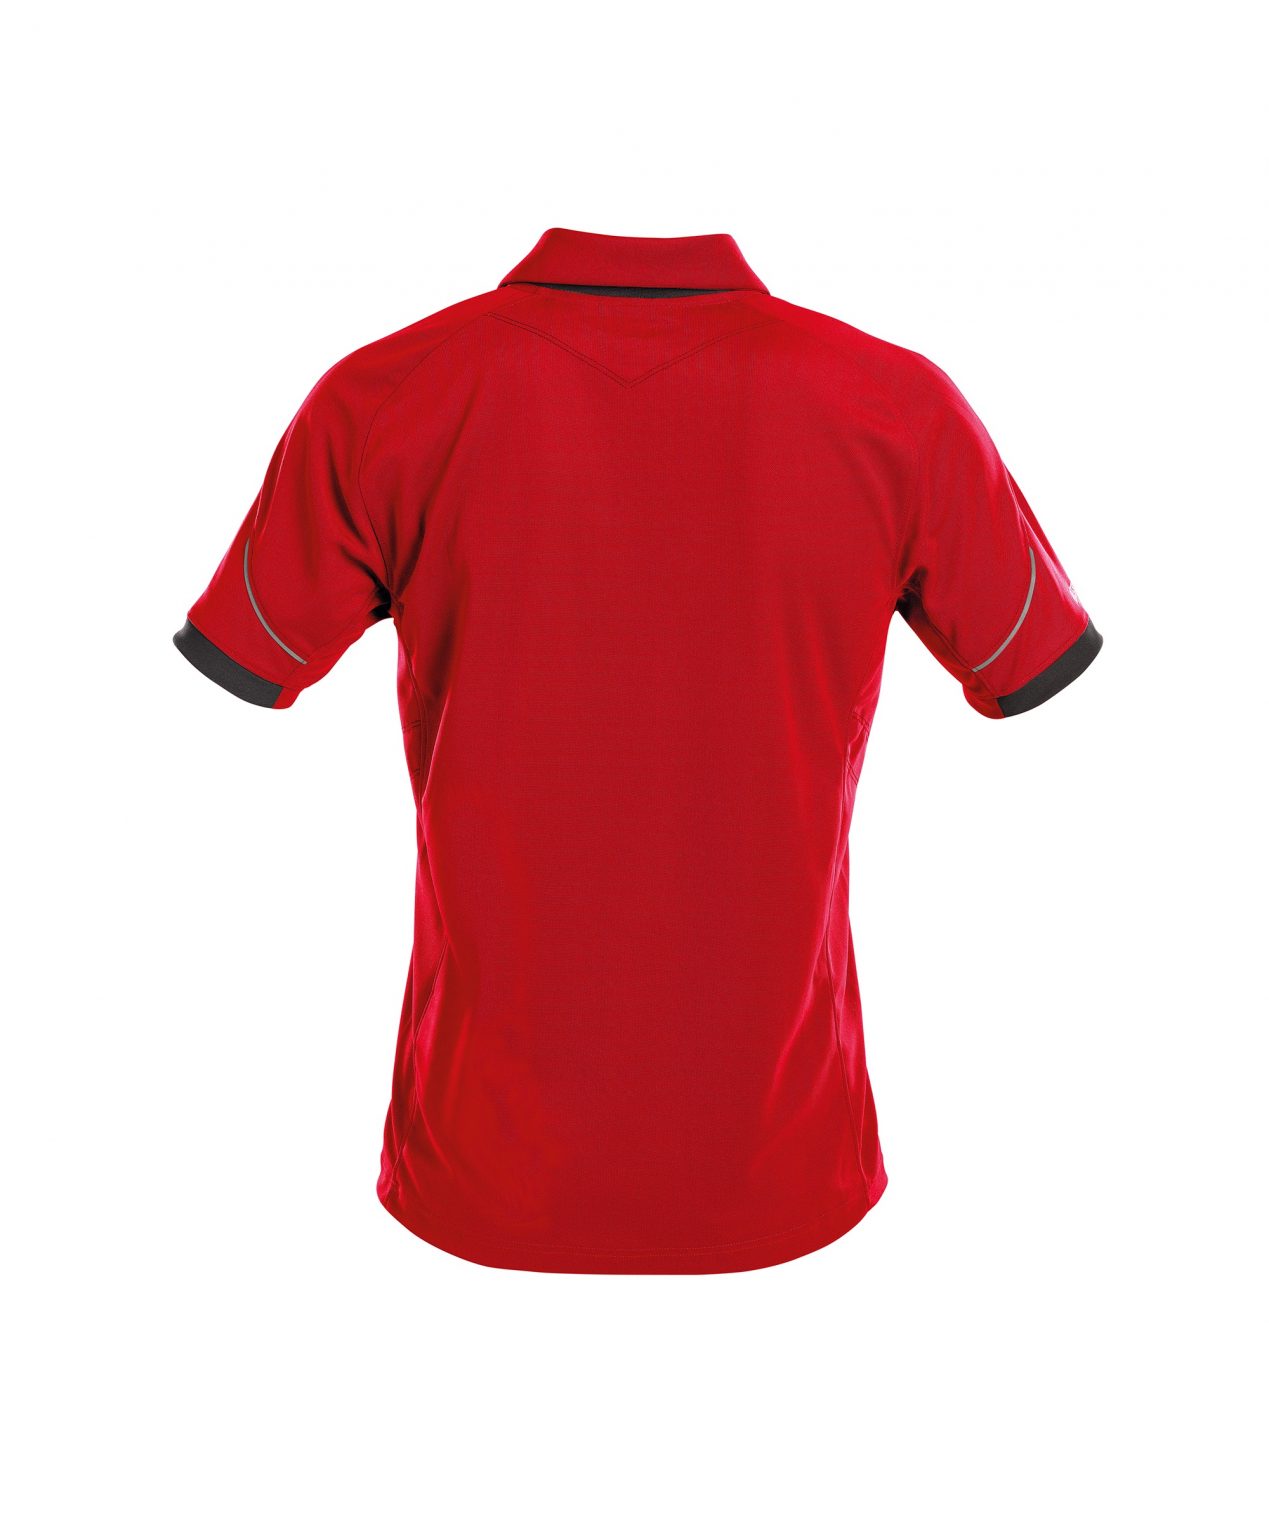 traxion polo shirt red black back